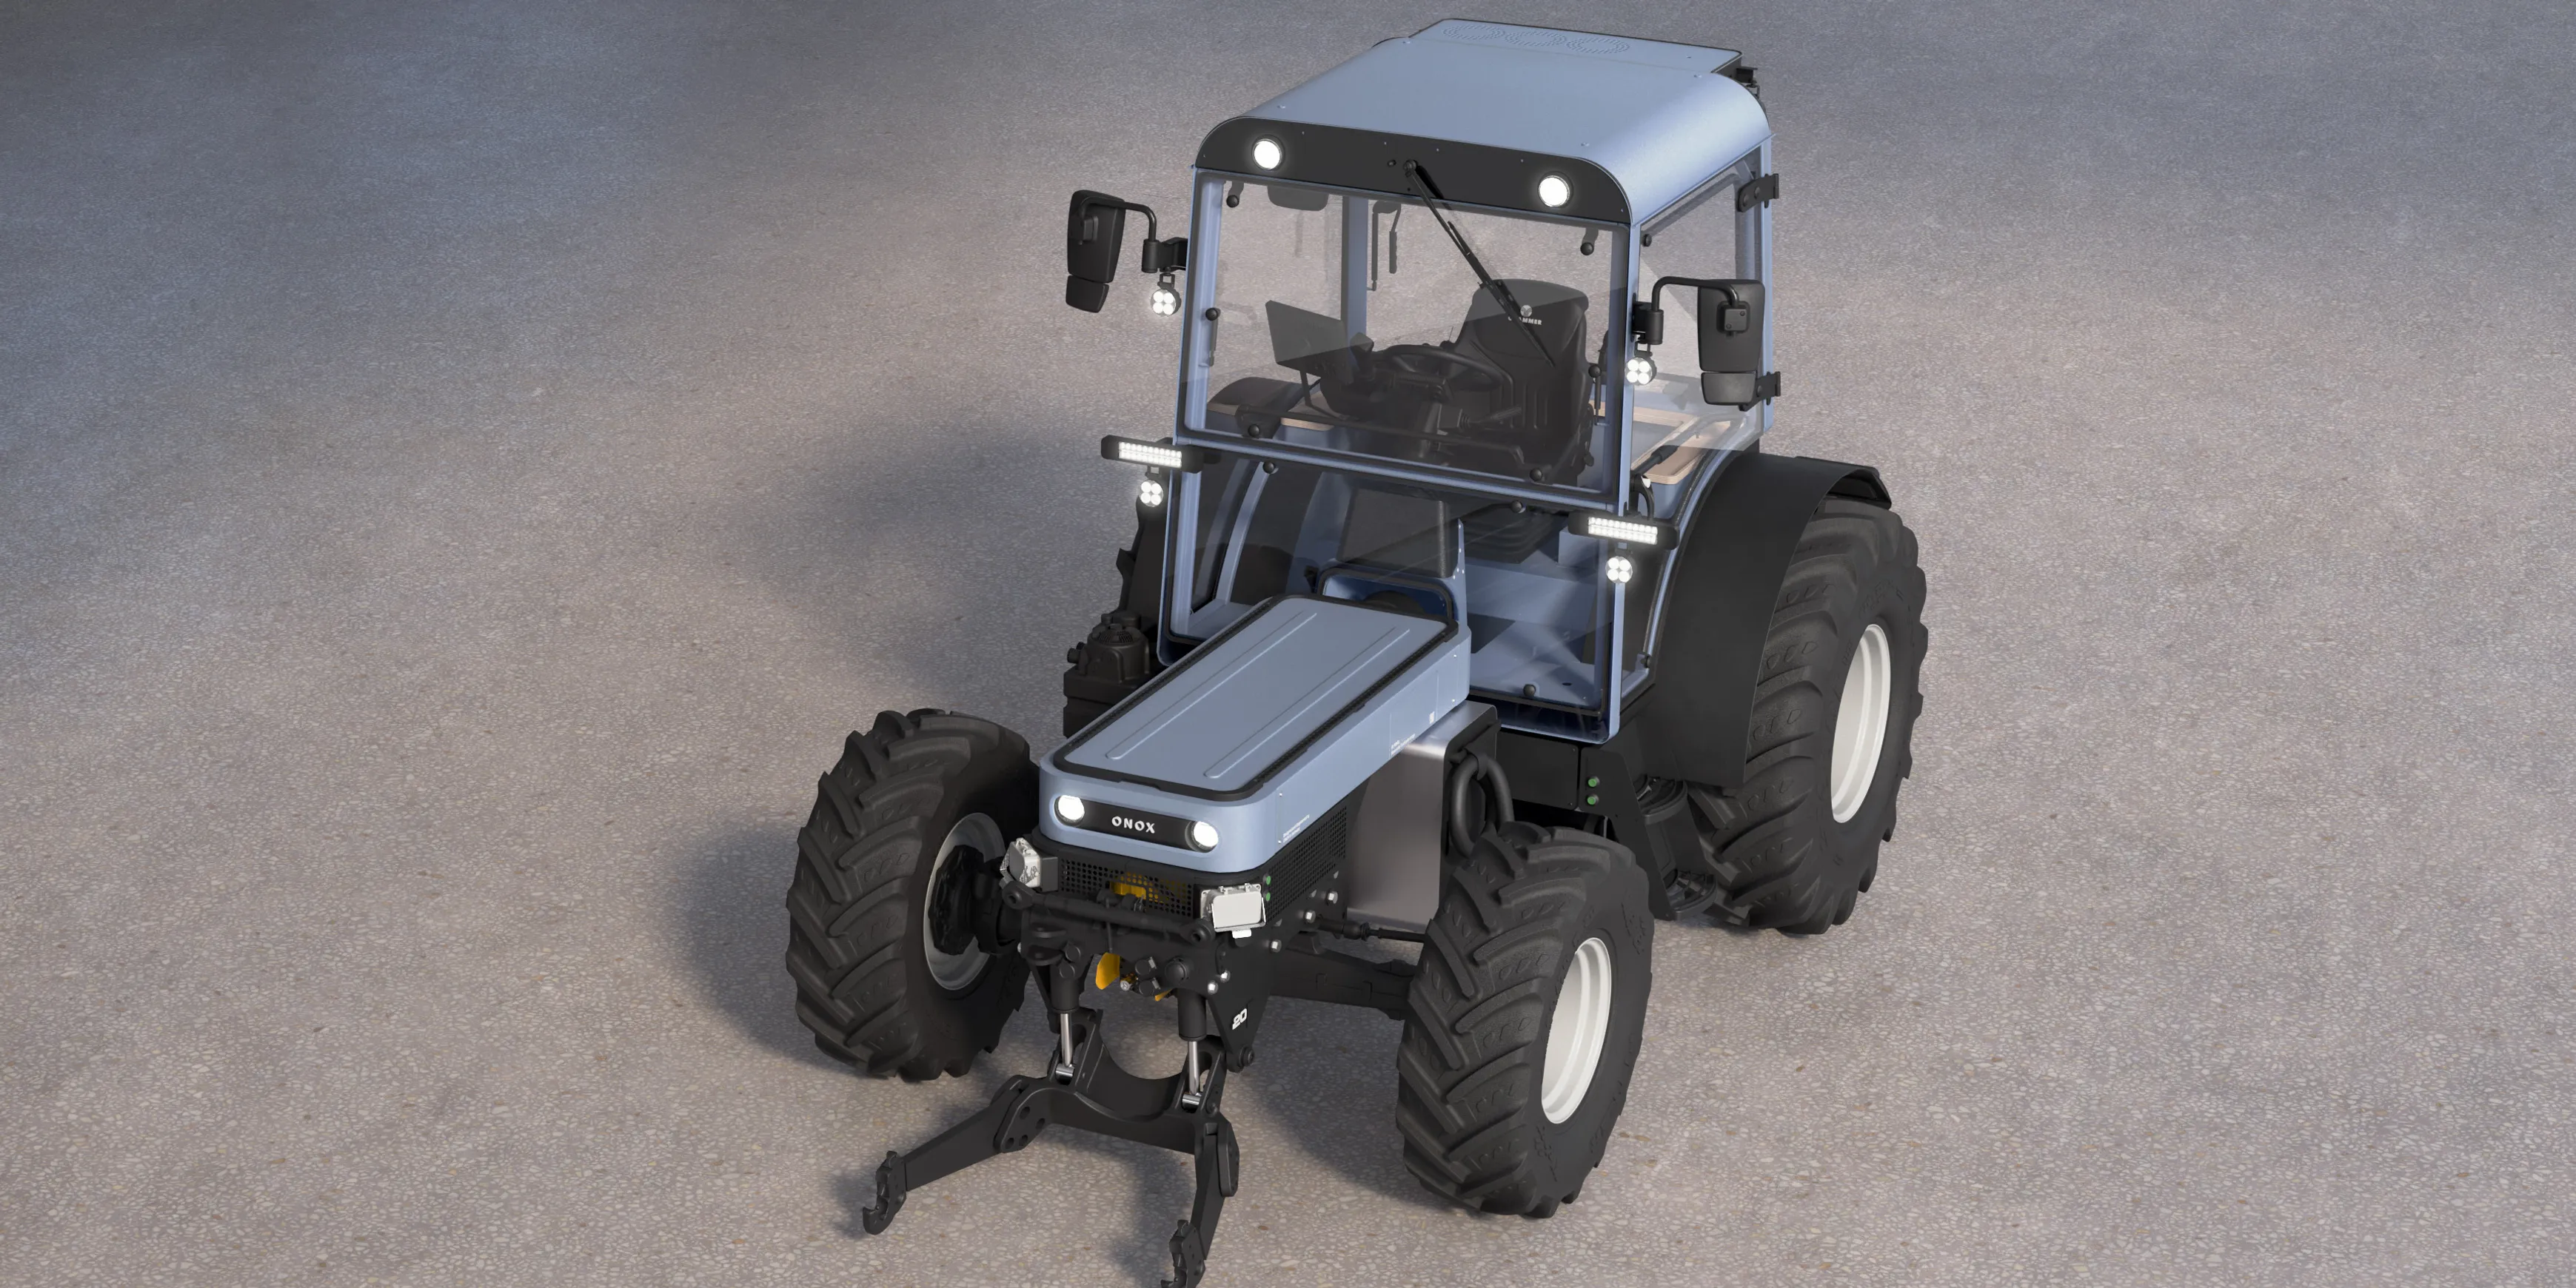 A frontal perspective view of the Onox electric tractor on a concrete floor